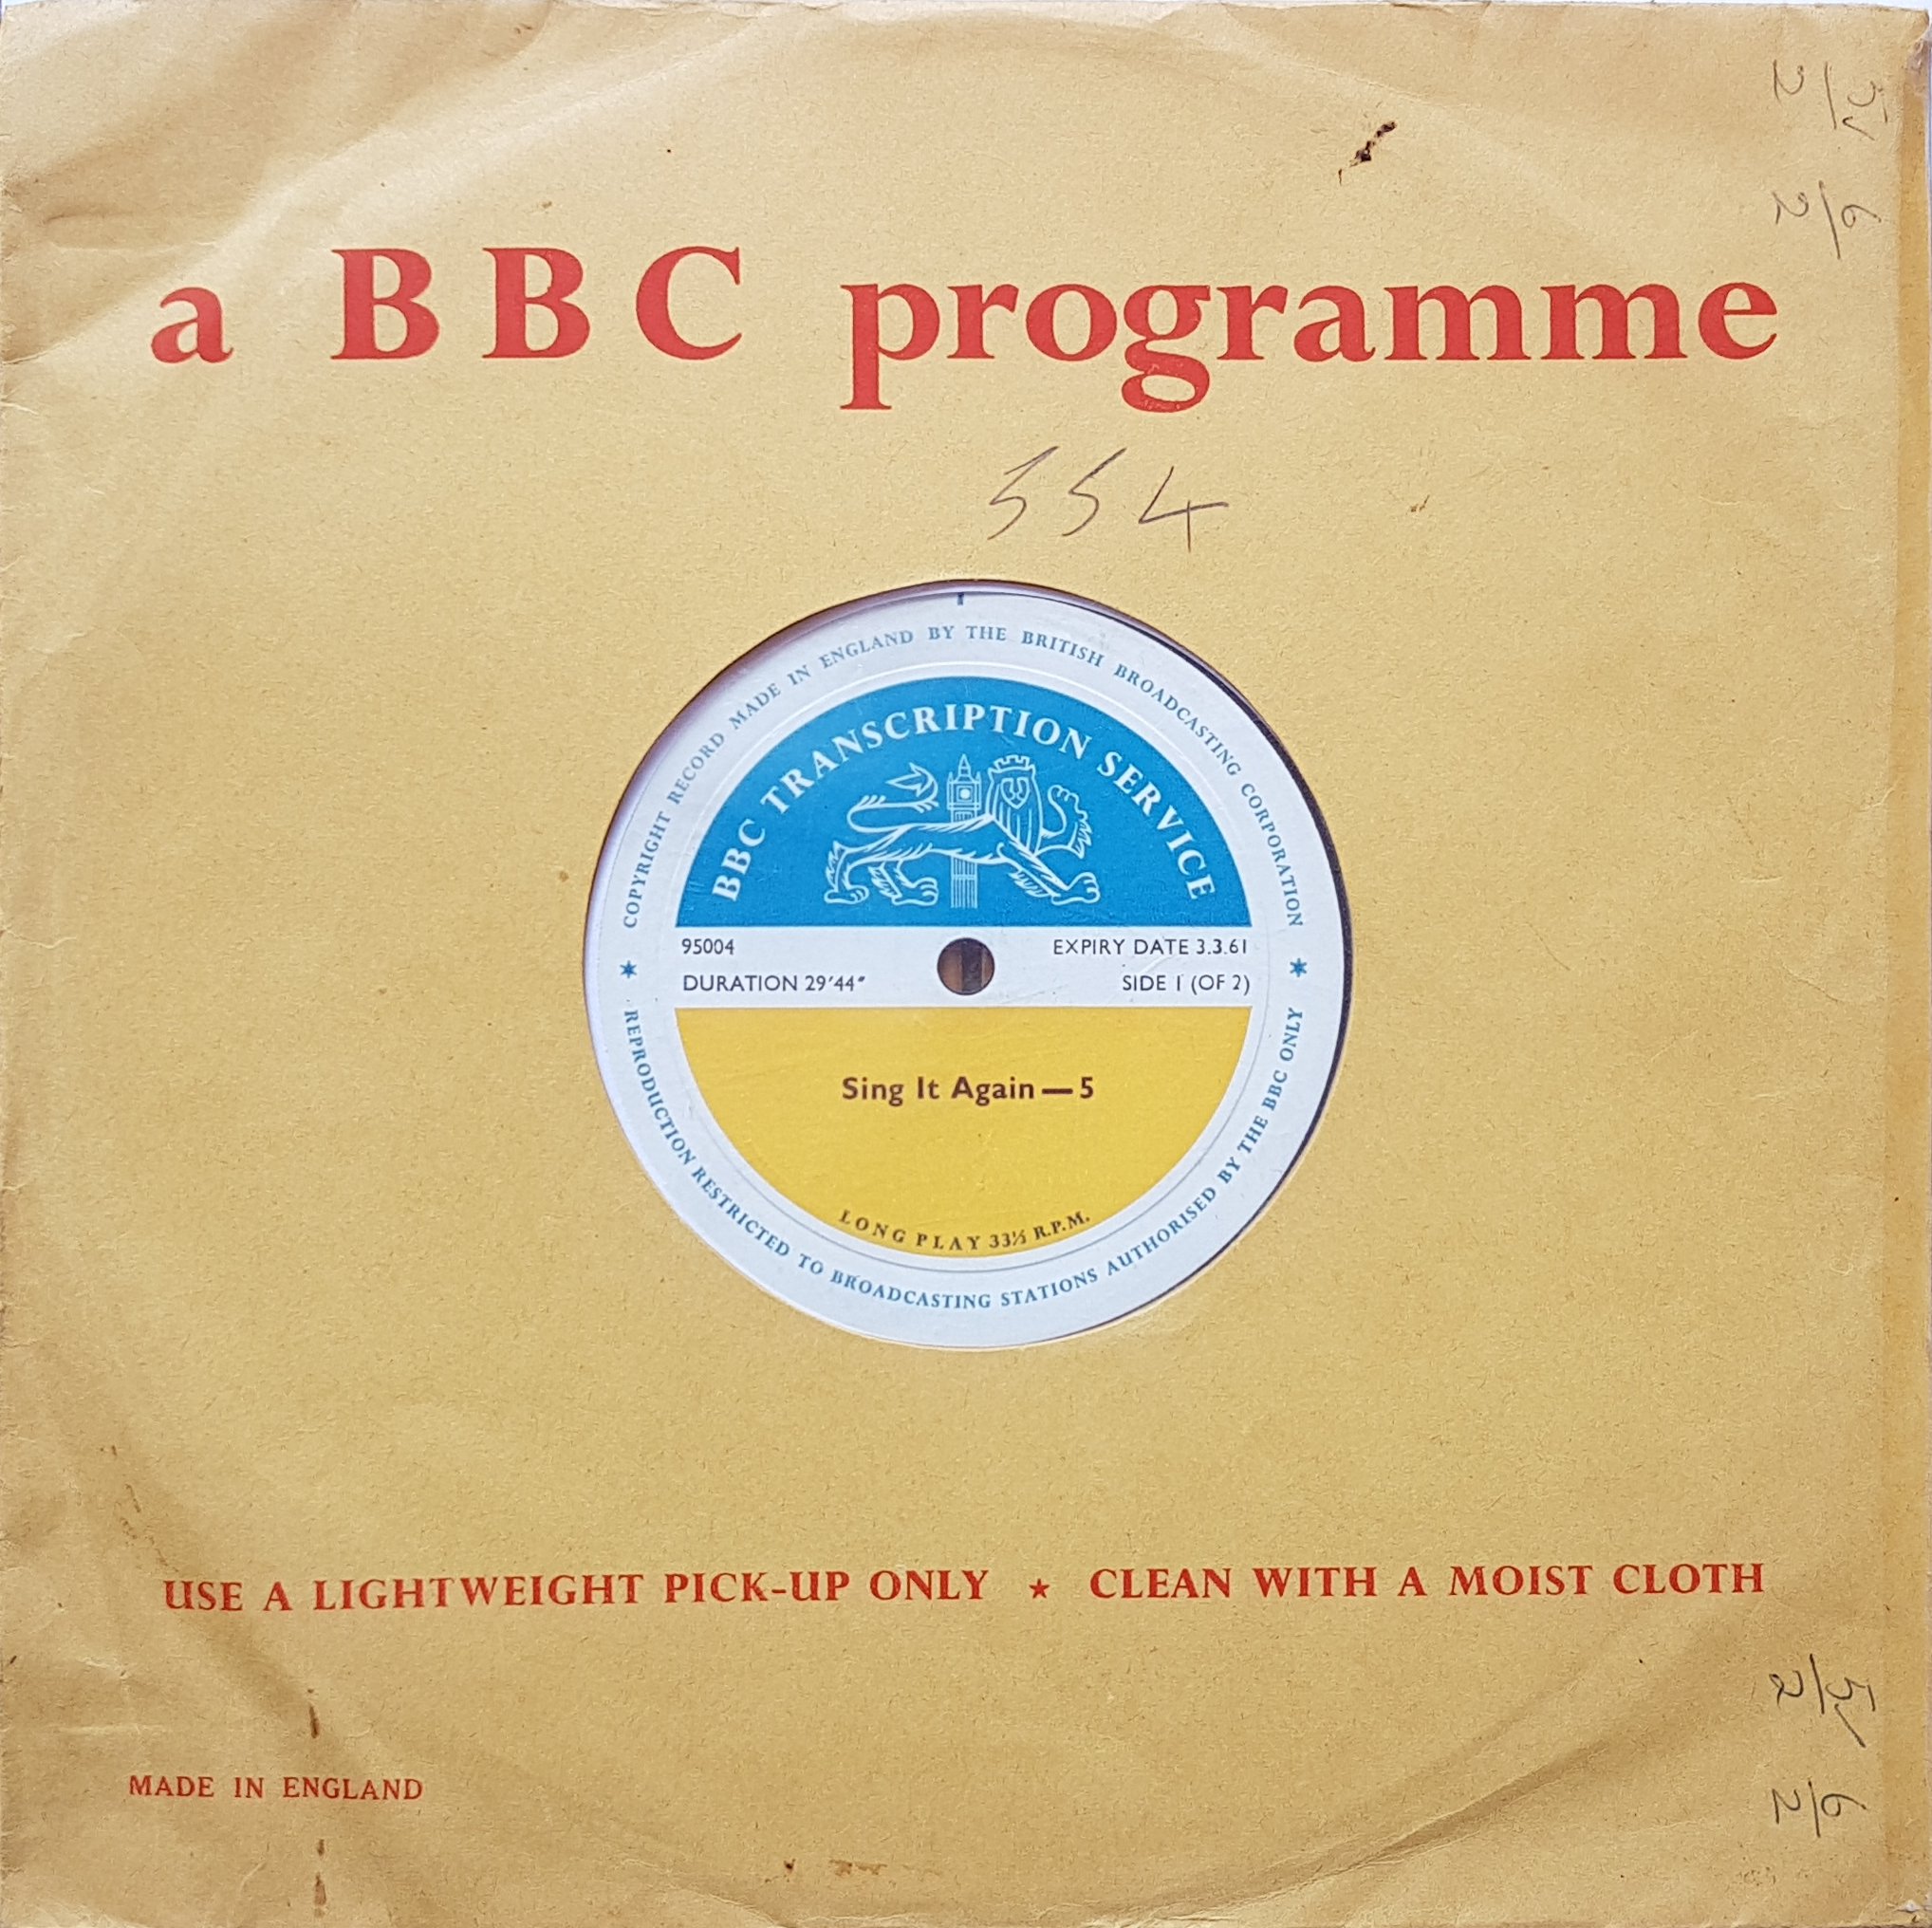 Picture of 95004 Sing it again - 5 / 6 (Side 1 or 2) by artist Various from the BBC 10inches - Records and Tapes library